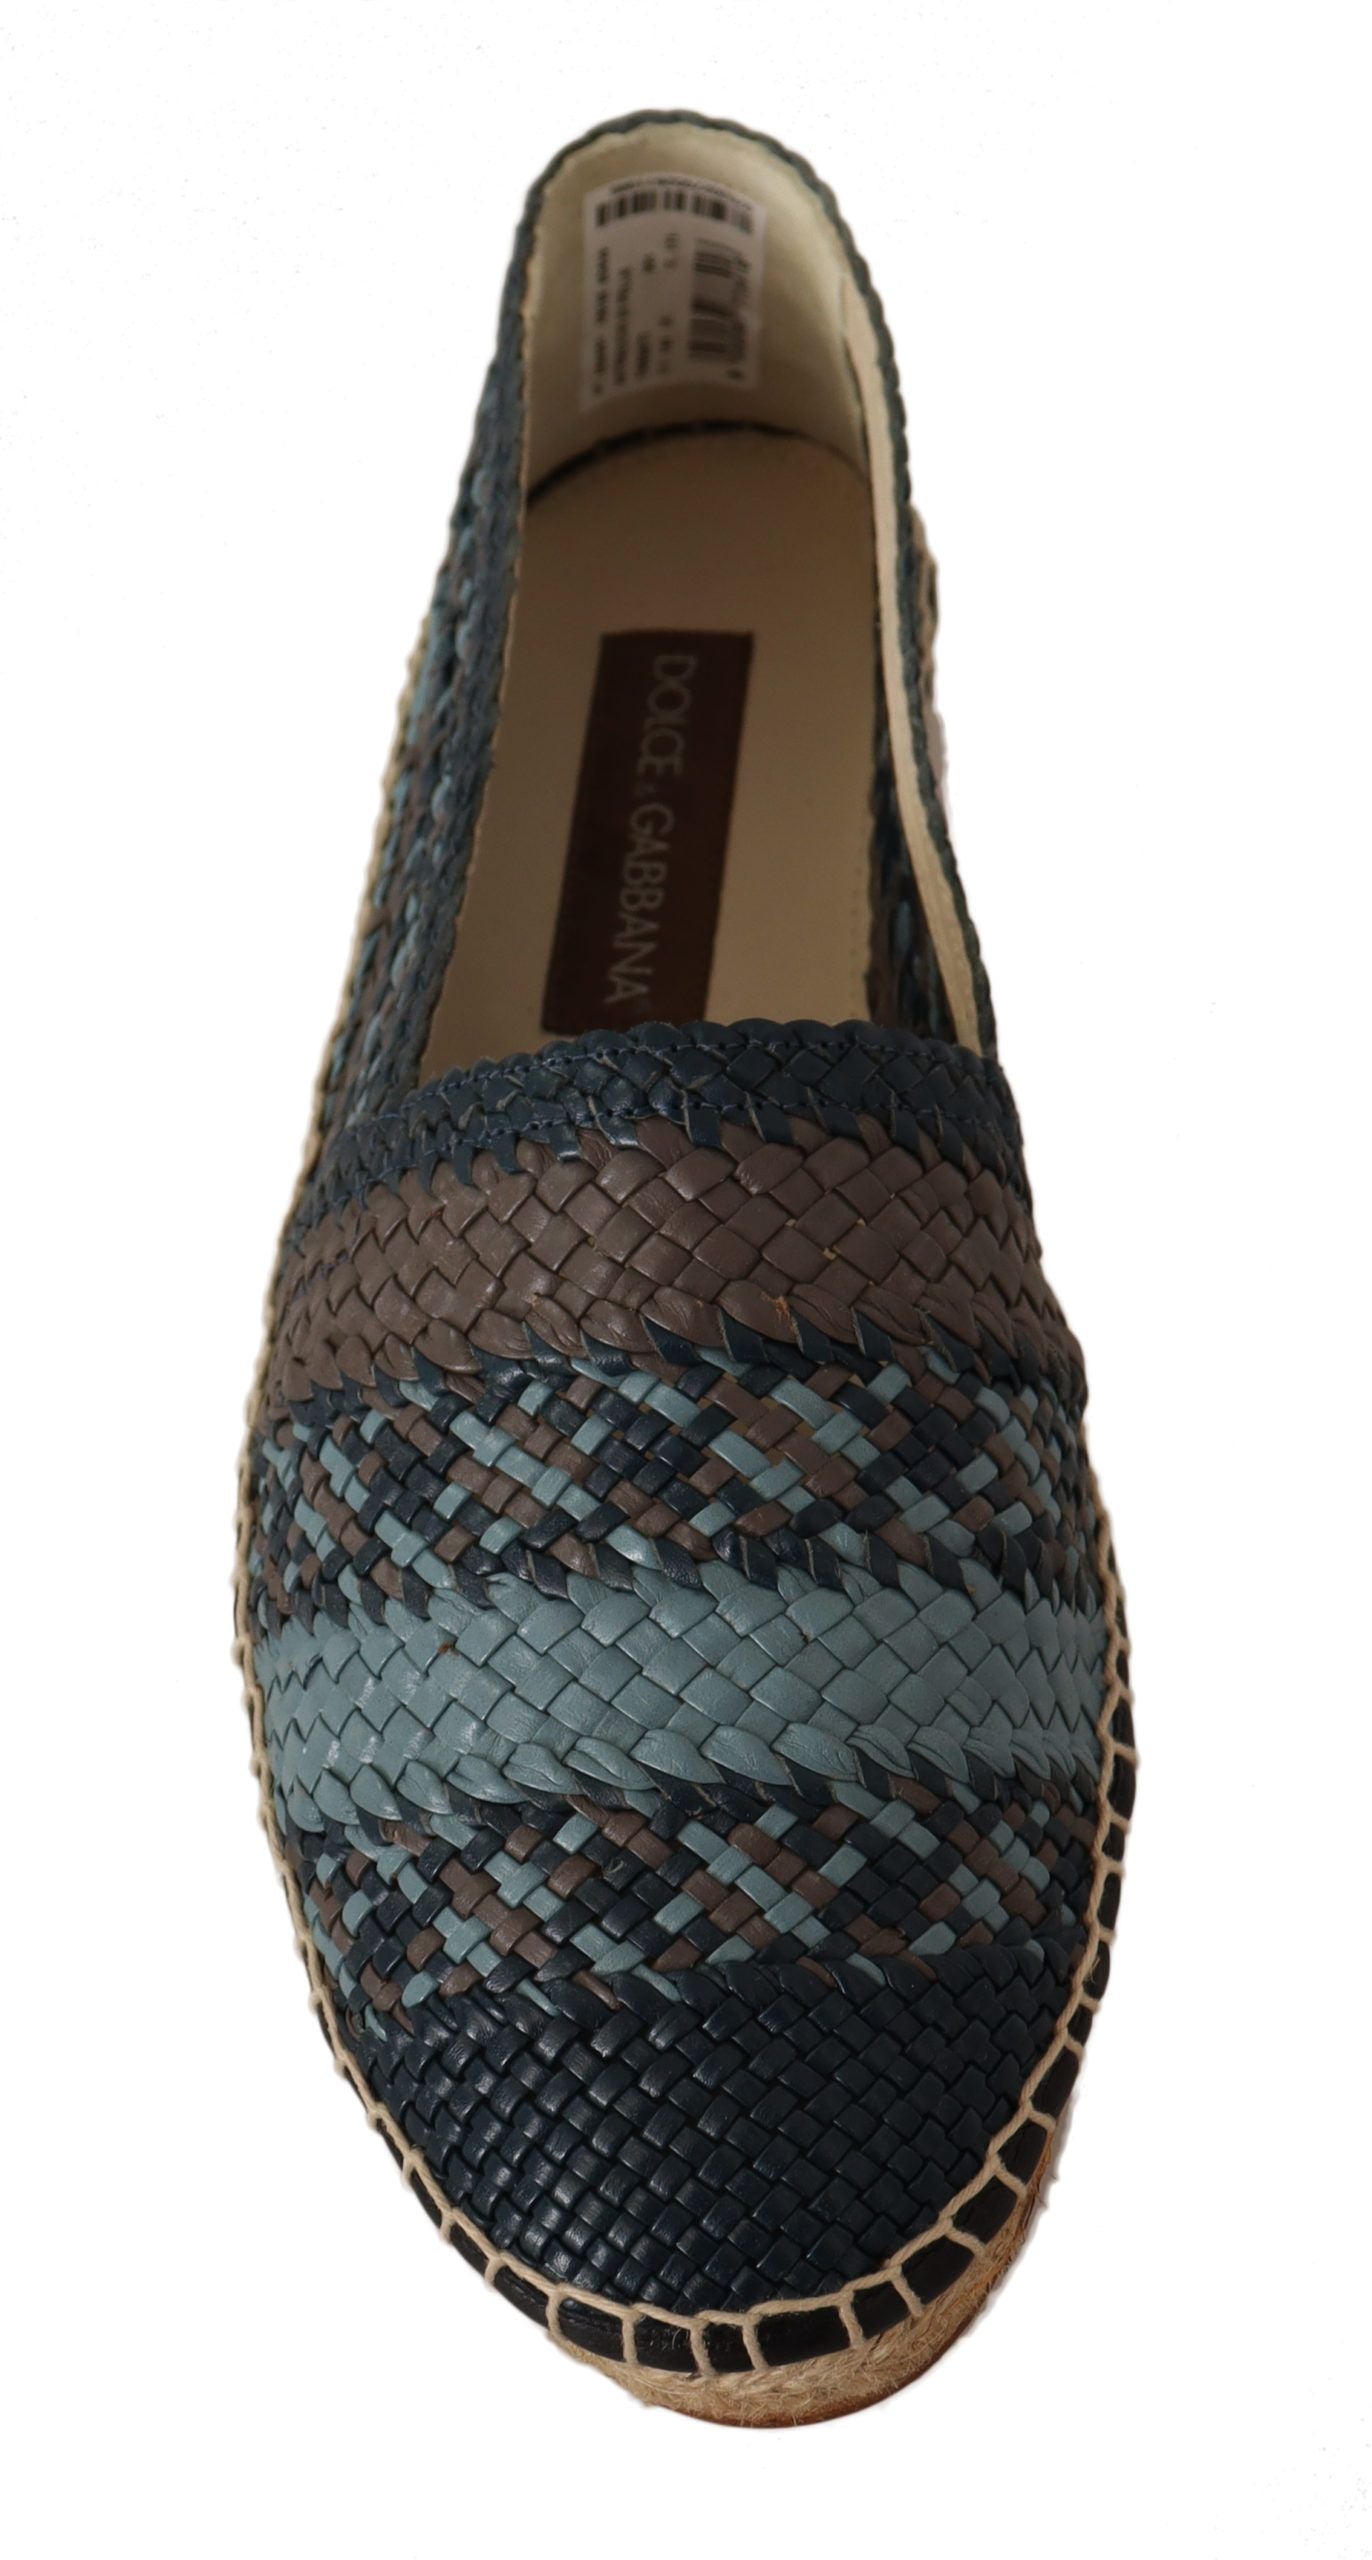 Blue Gray Slip On Buffalo Espadrille Shoes - Designed by Dolce & Gabbana Available to Buy at a Discounted Price on Moon Behind The Hill Online Designer Discount Store